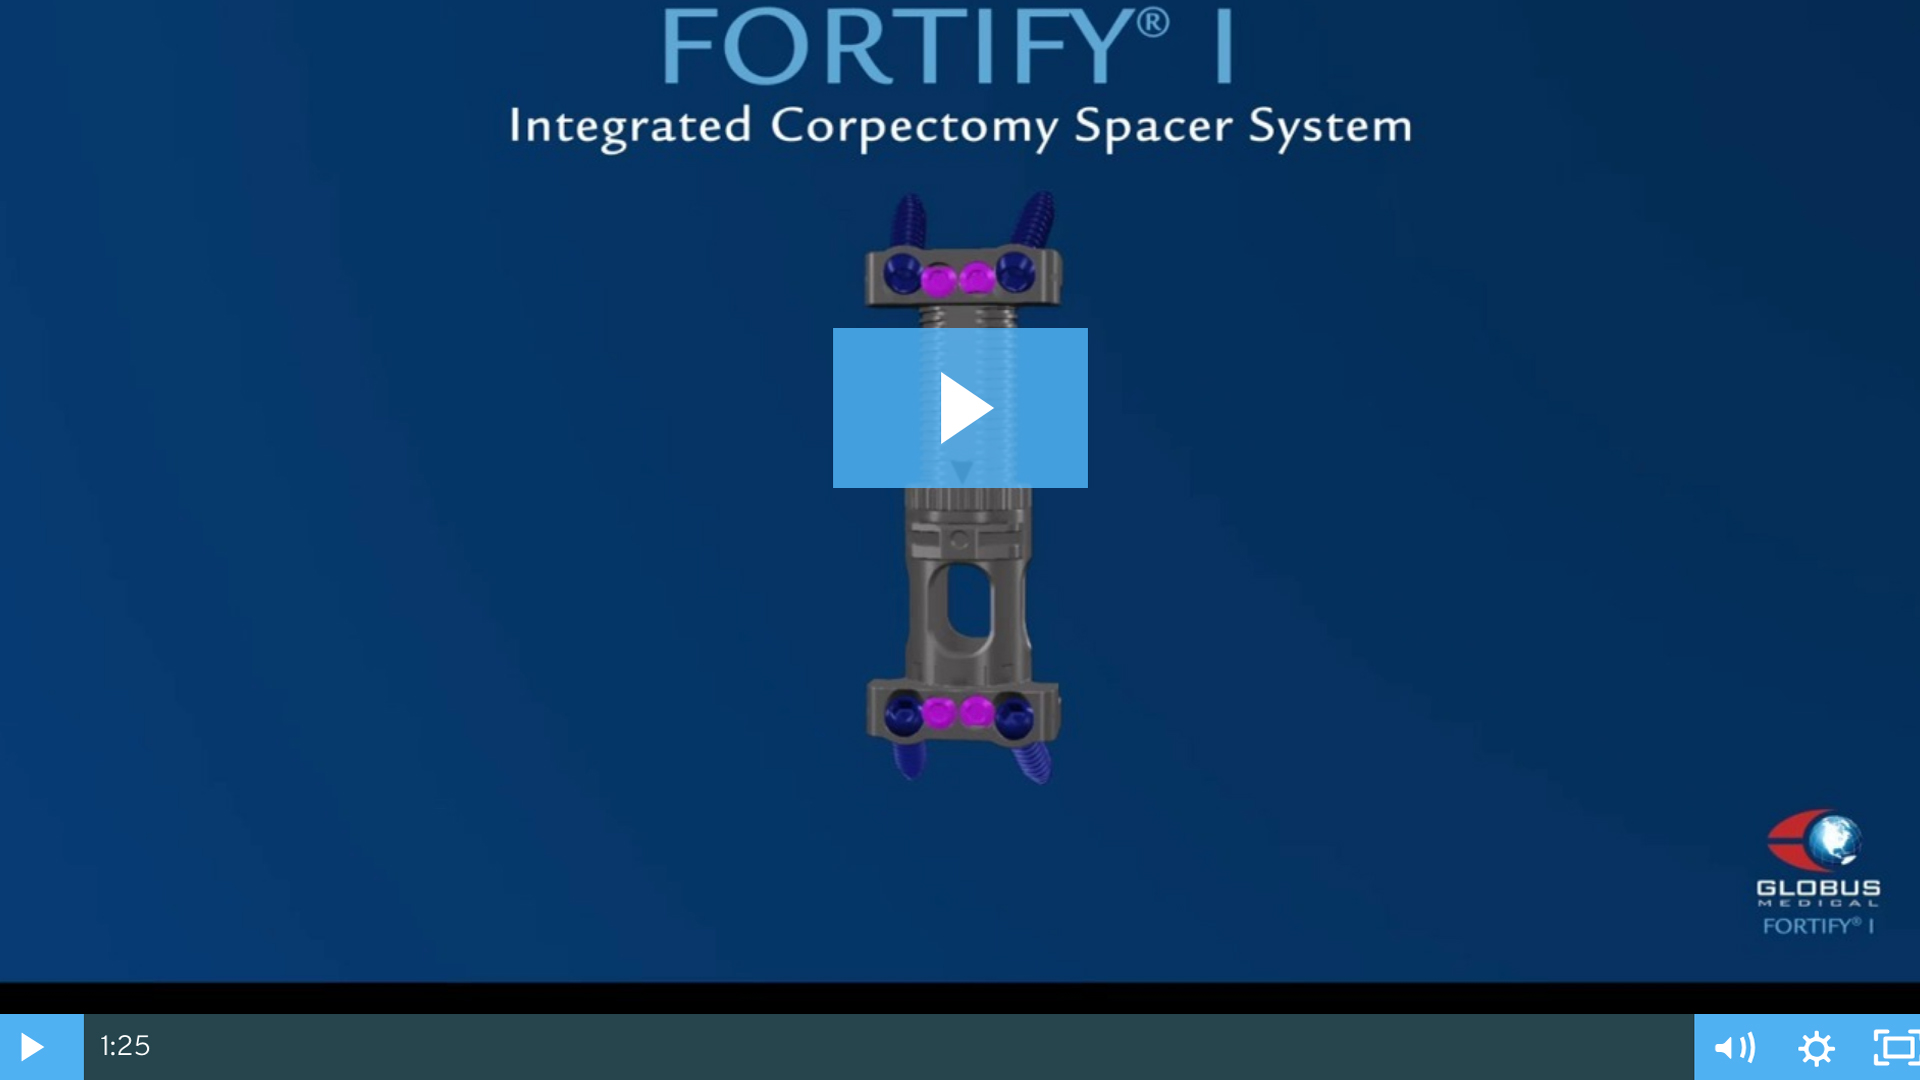 FORTIFY®-I Expandable Integrated Corpectomy Spacer